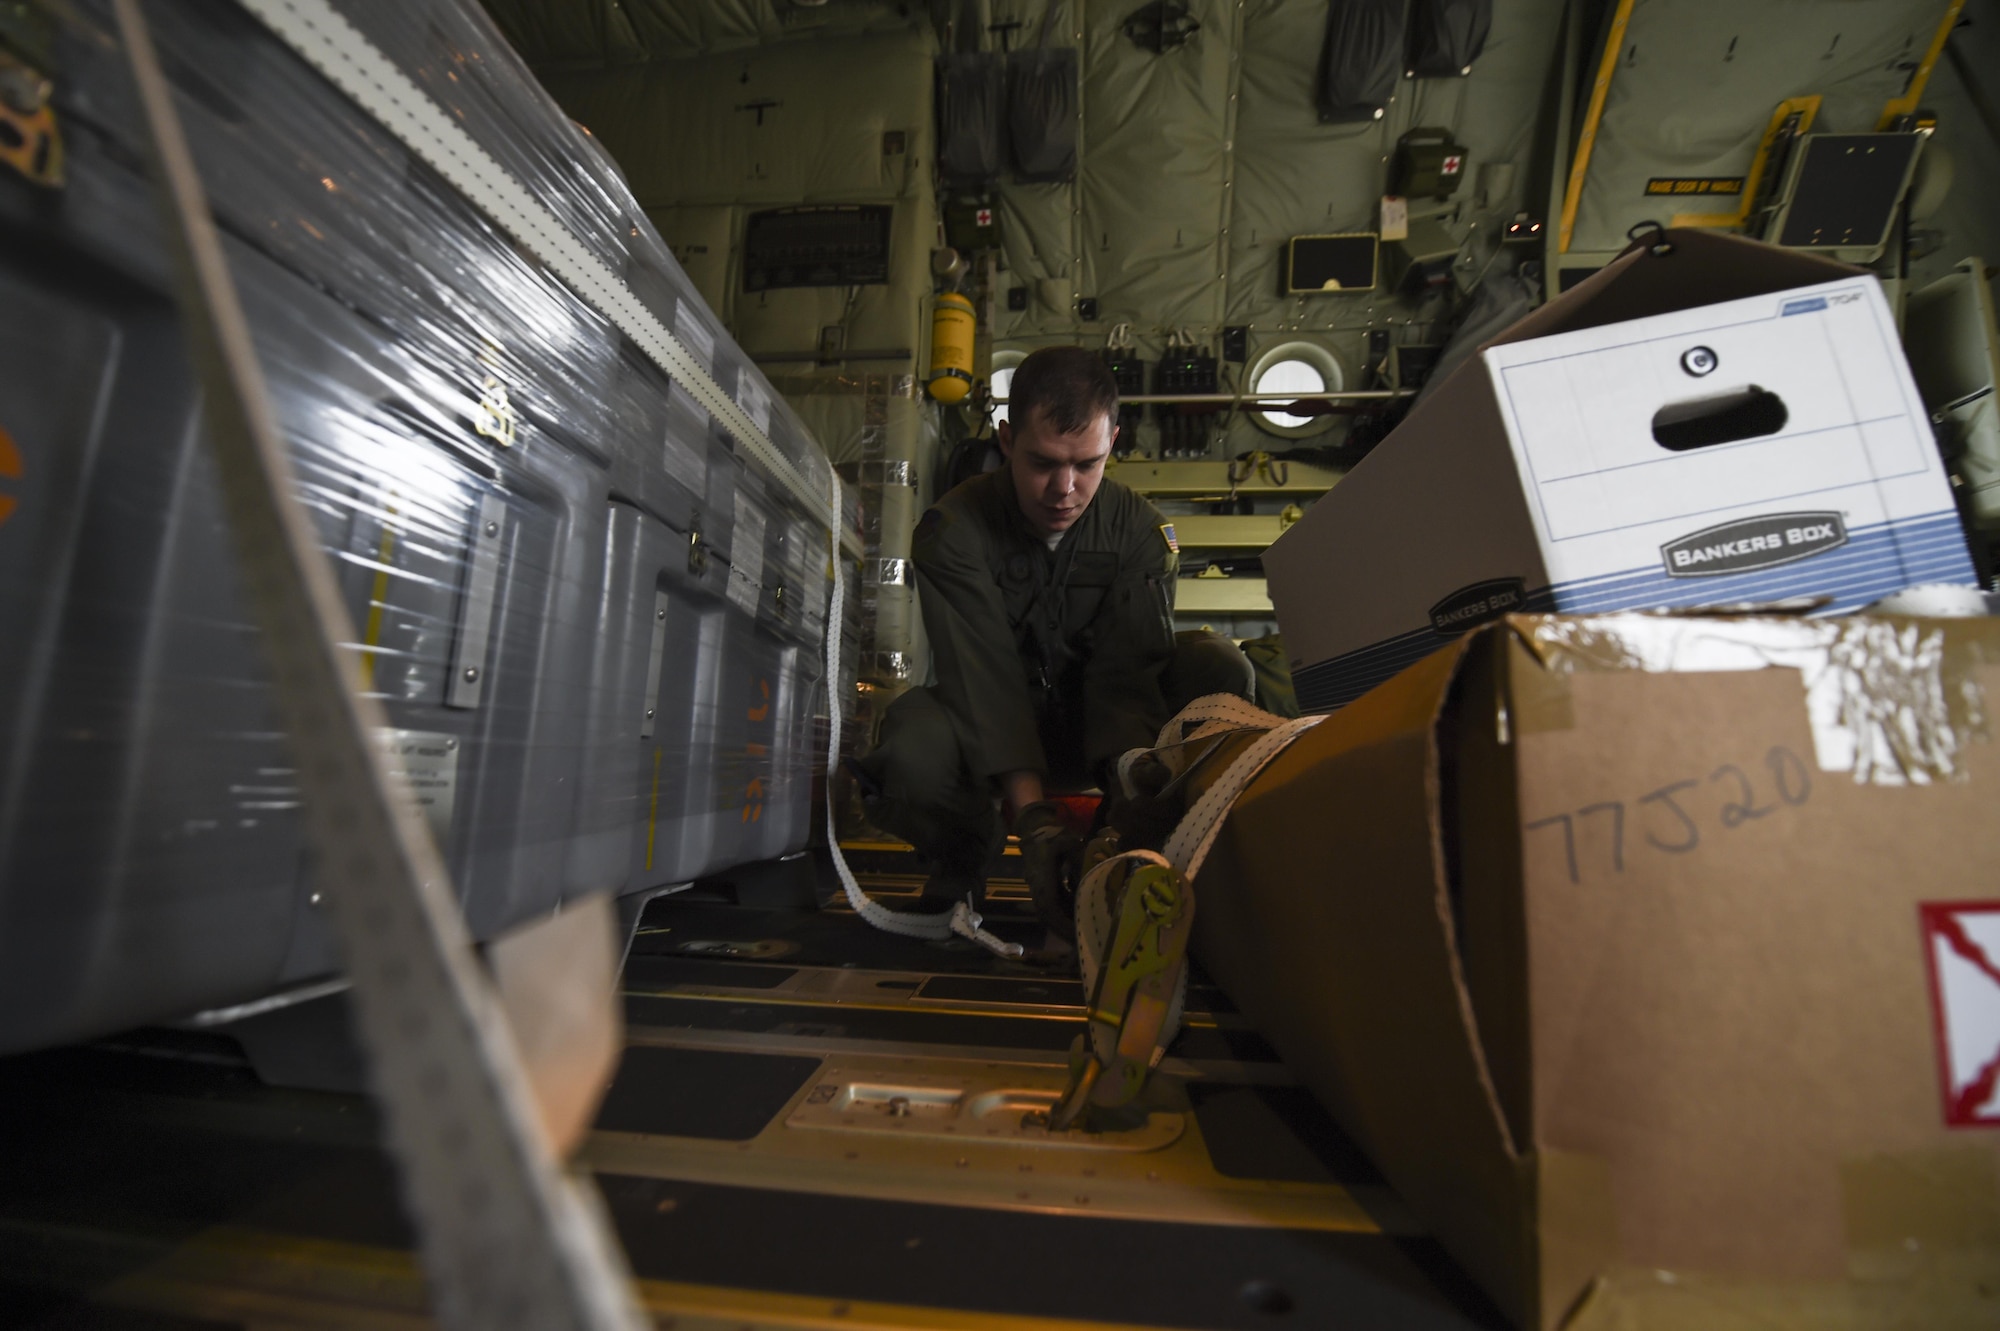 Staff Sgt. Johnny Hooker Jr., a special missions aviator with the 1st Special Operations Group Detachment 2, ties down cargo on an MC-130J Commando II at Lockheed Martin in Marietta, Ga., Dec. 11, 2015. The MC-130J will undergo modifications to become an AC-130J Ghostrider, which will provide the 1 SOW with close air support and air interdiction capabilities. (U.S. Air Force photo by Senior Airman Ryan Conroy)